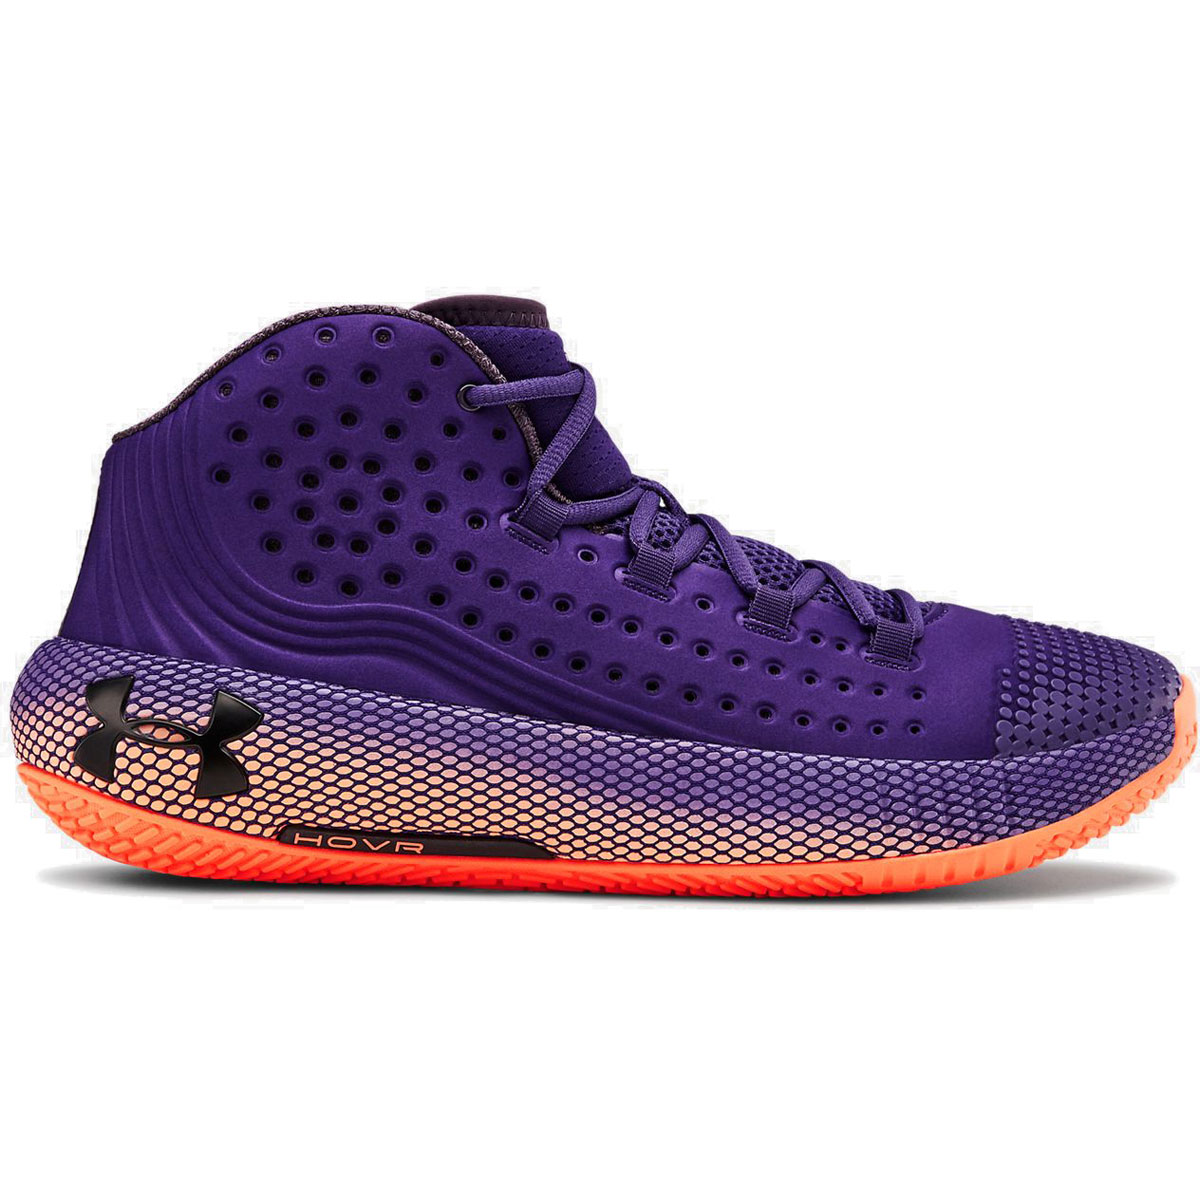 Detail Under Armour Havoc Basketball Shoes Nomer 52